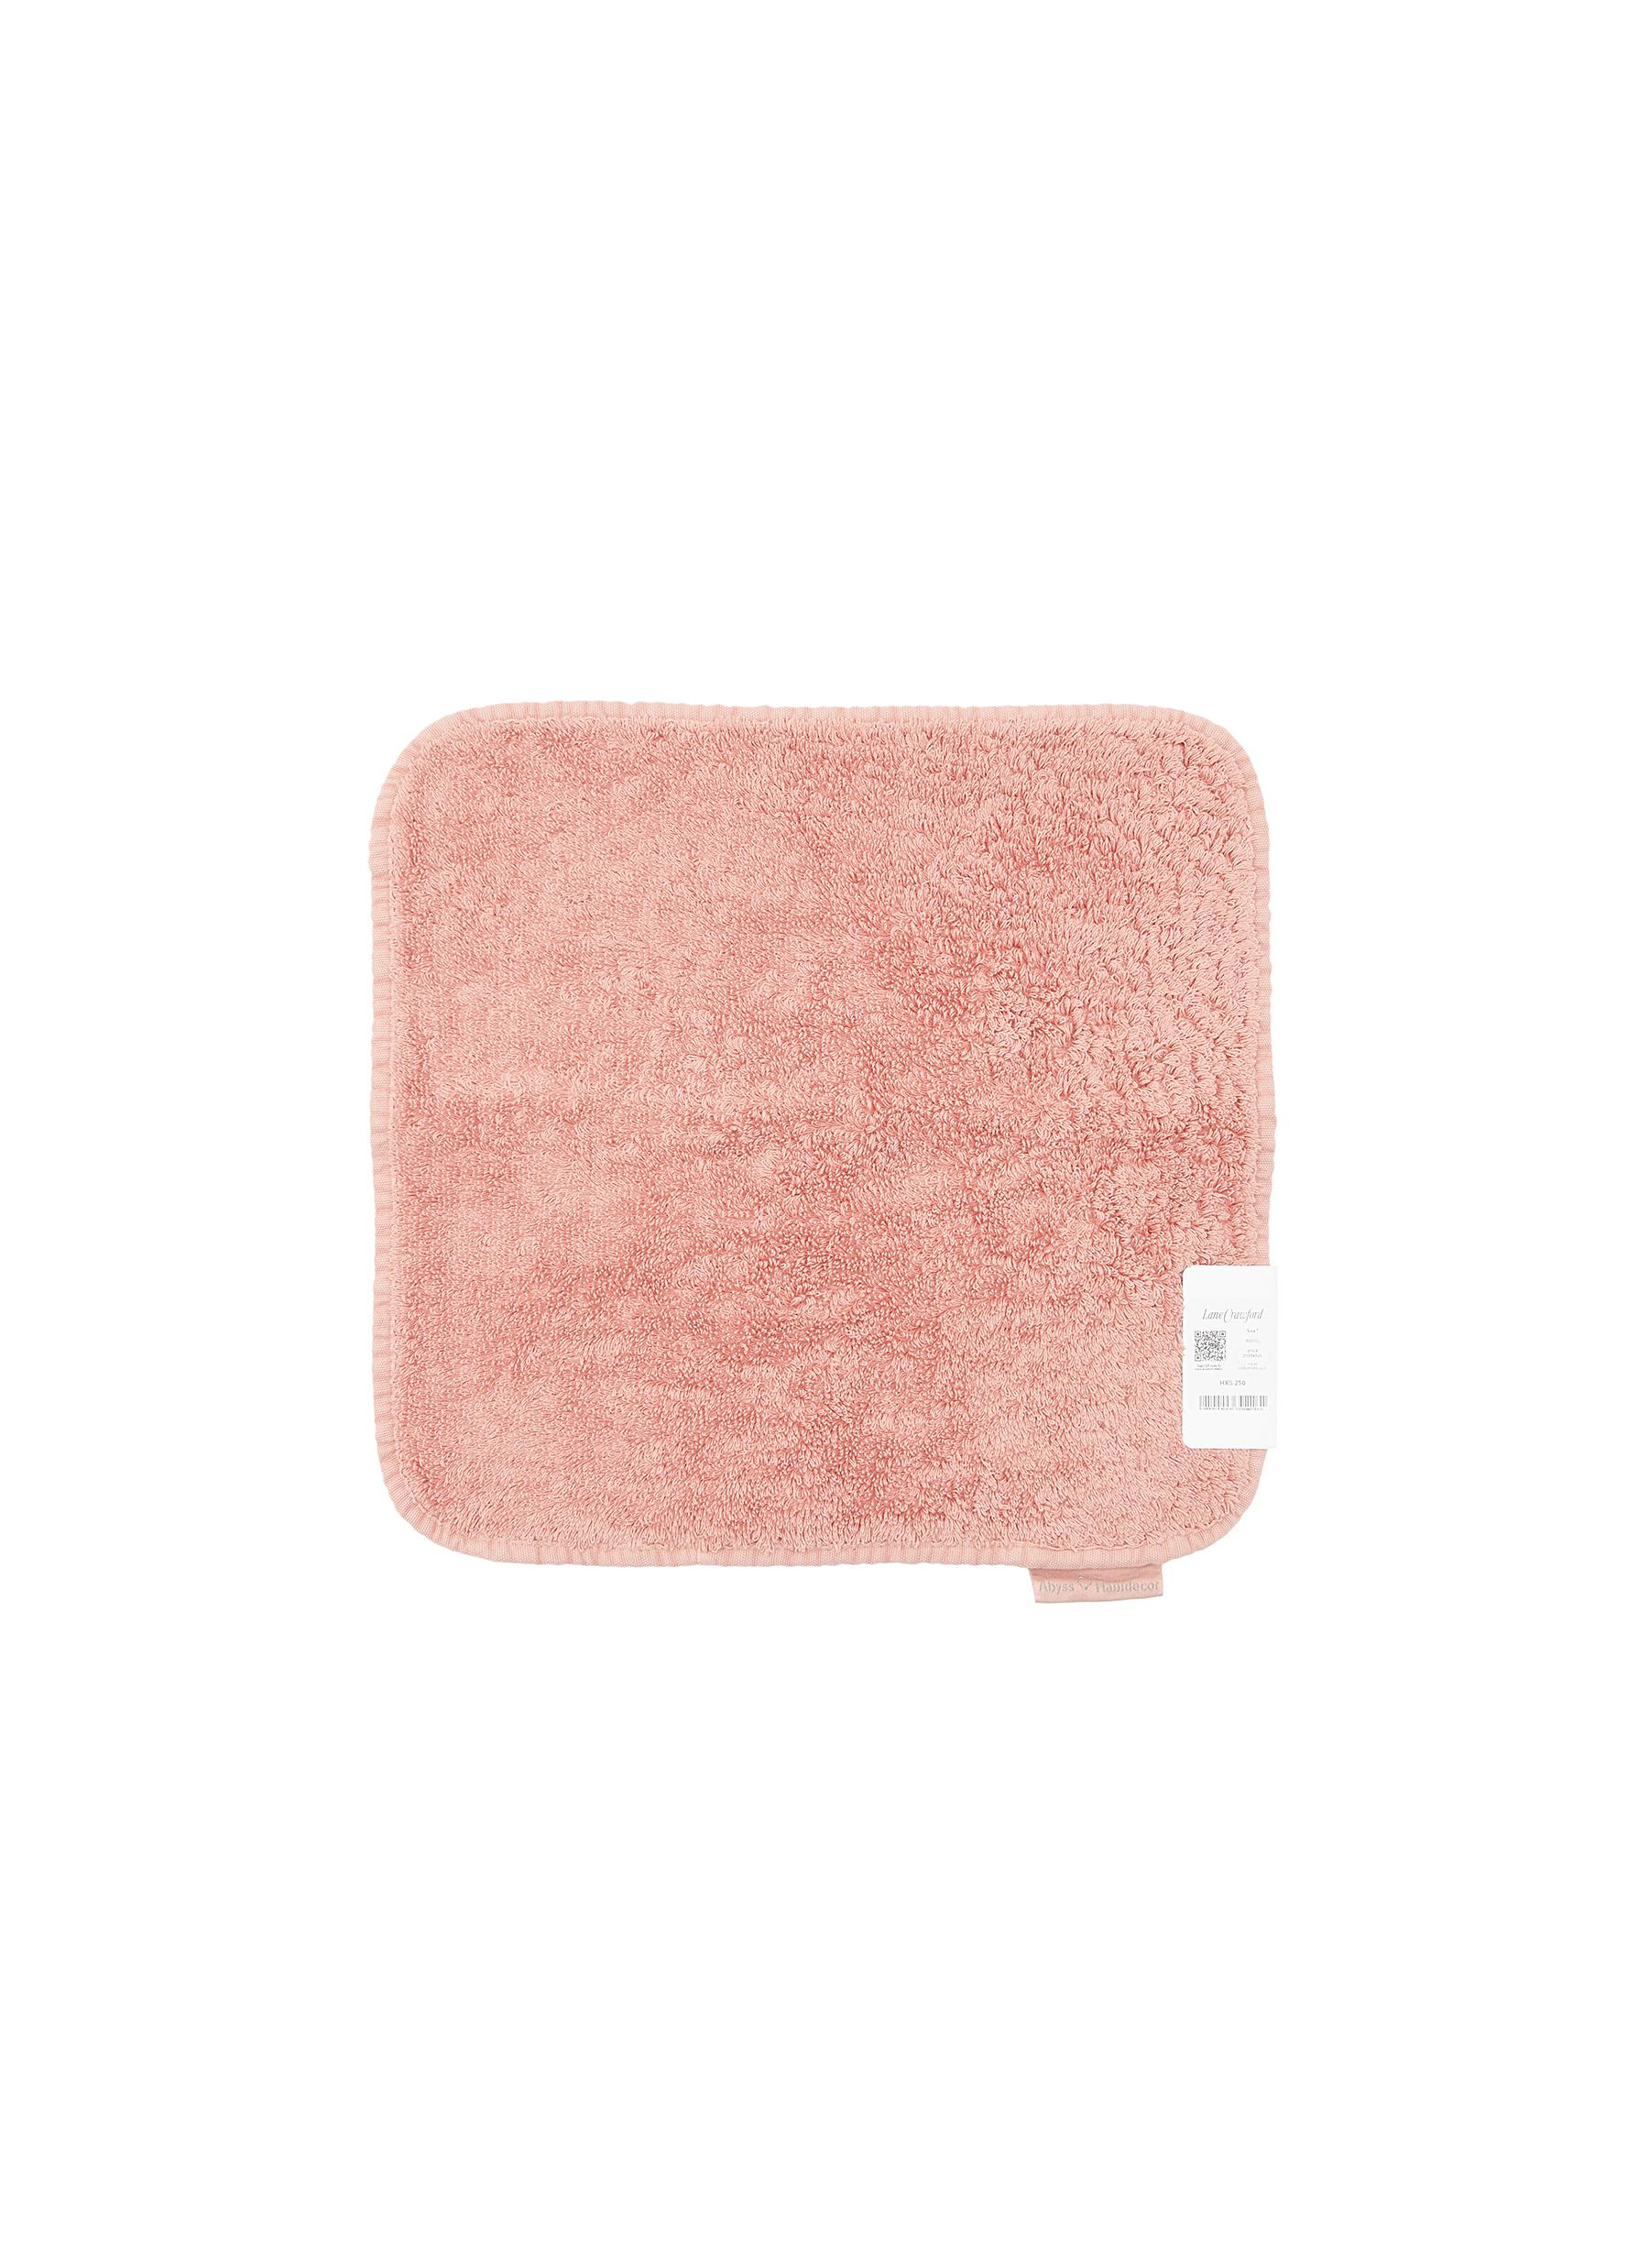 Abyss Super Pile Face Cloth - Rosette In Pink